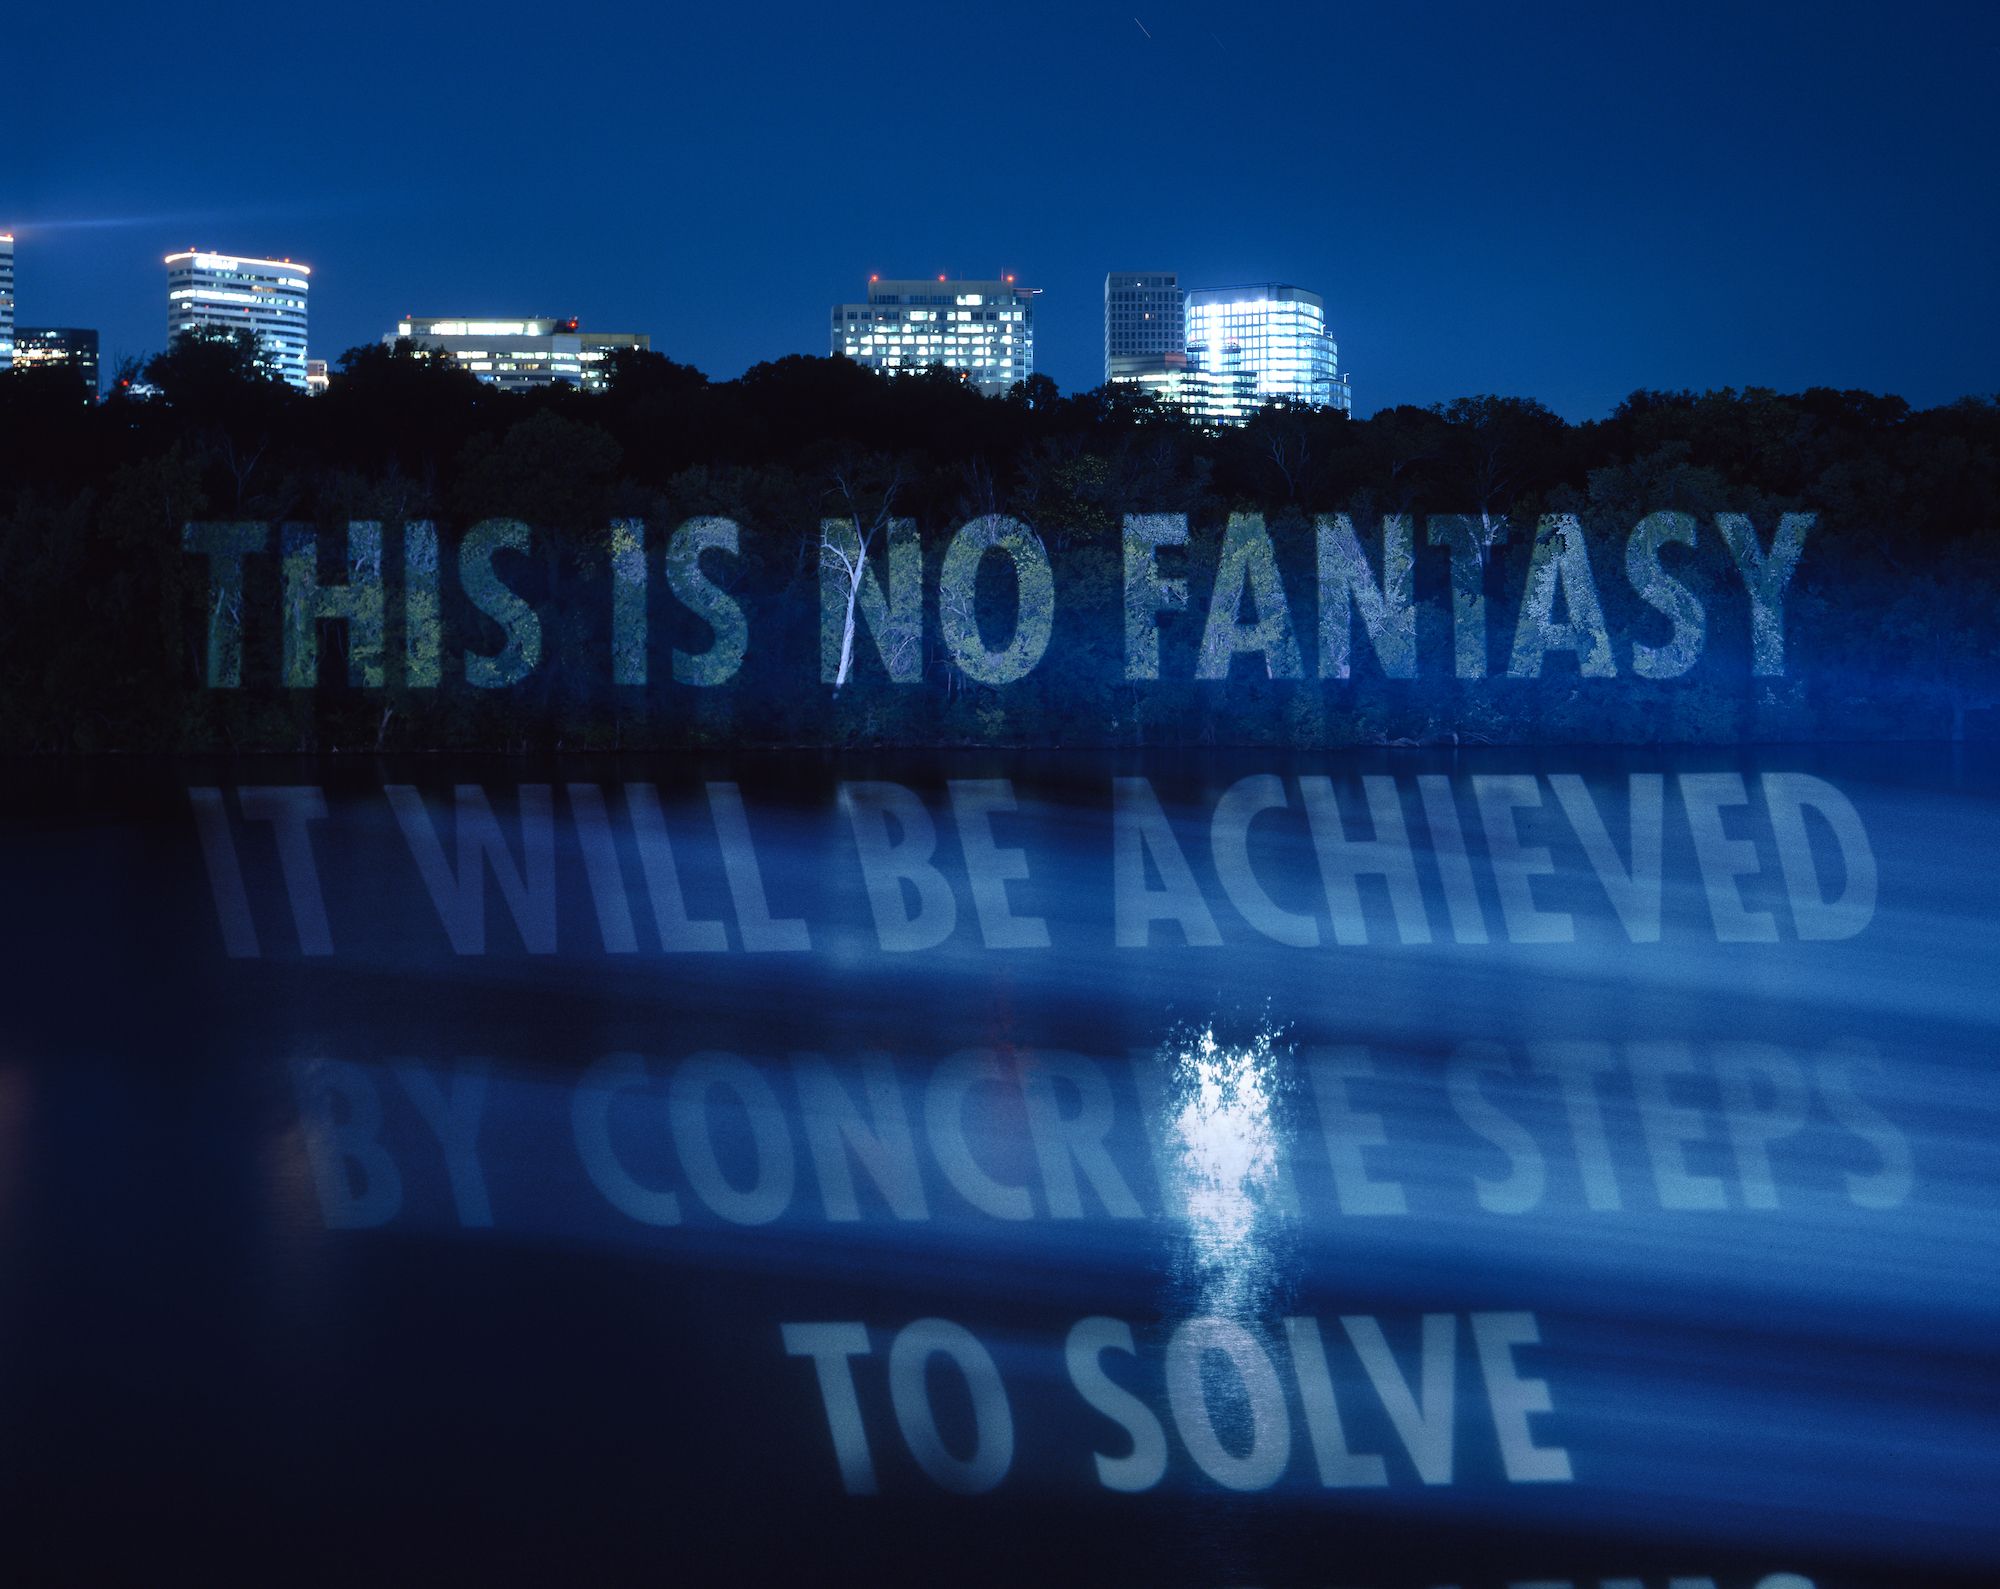 Jenny Holzer to project quotes about democracy in DC to celebrate